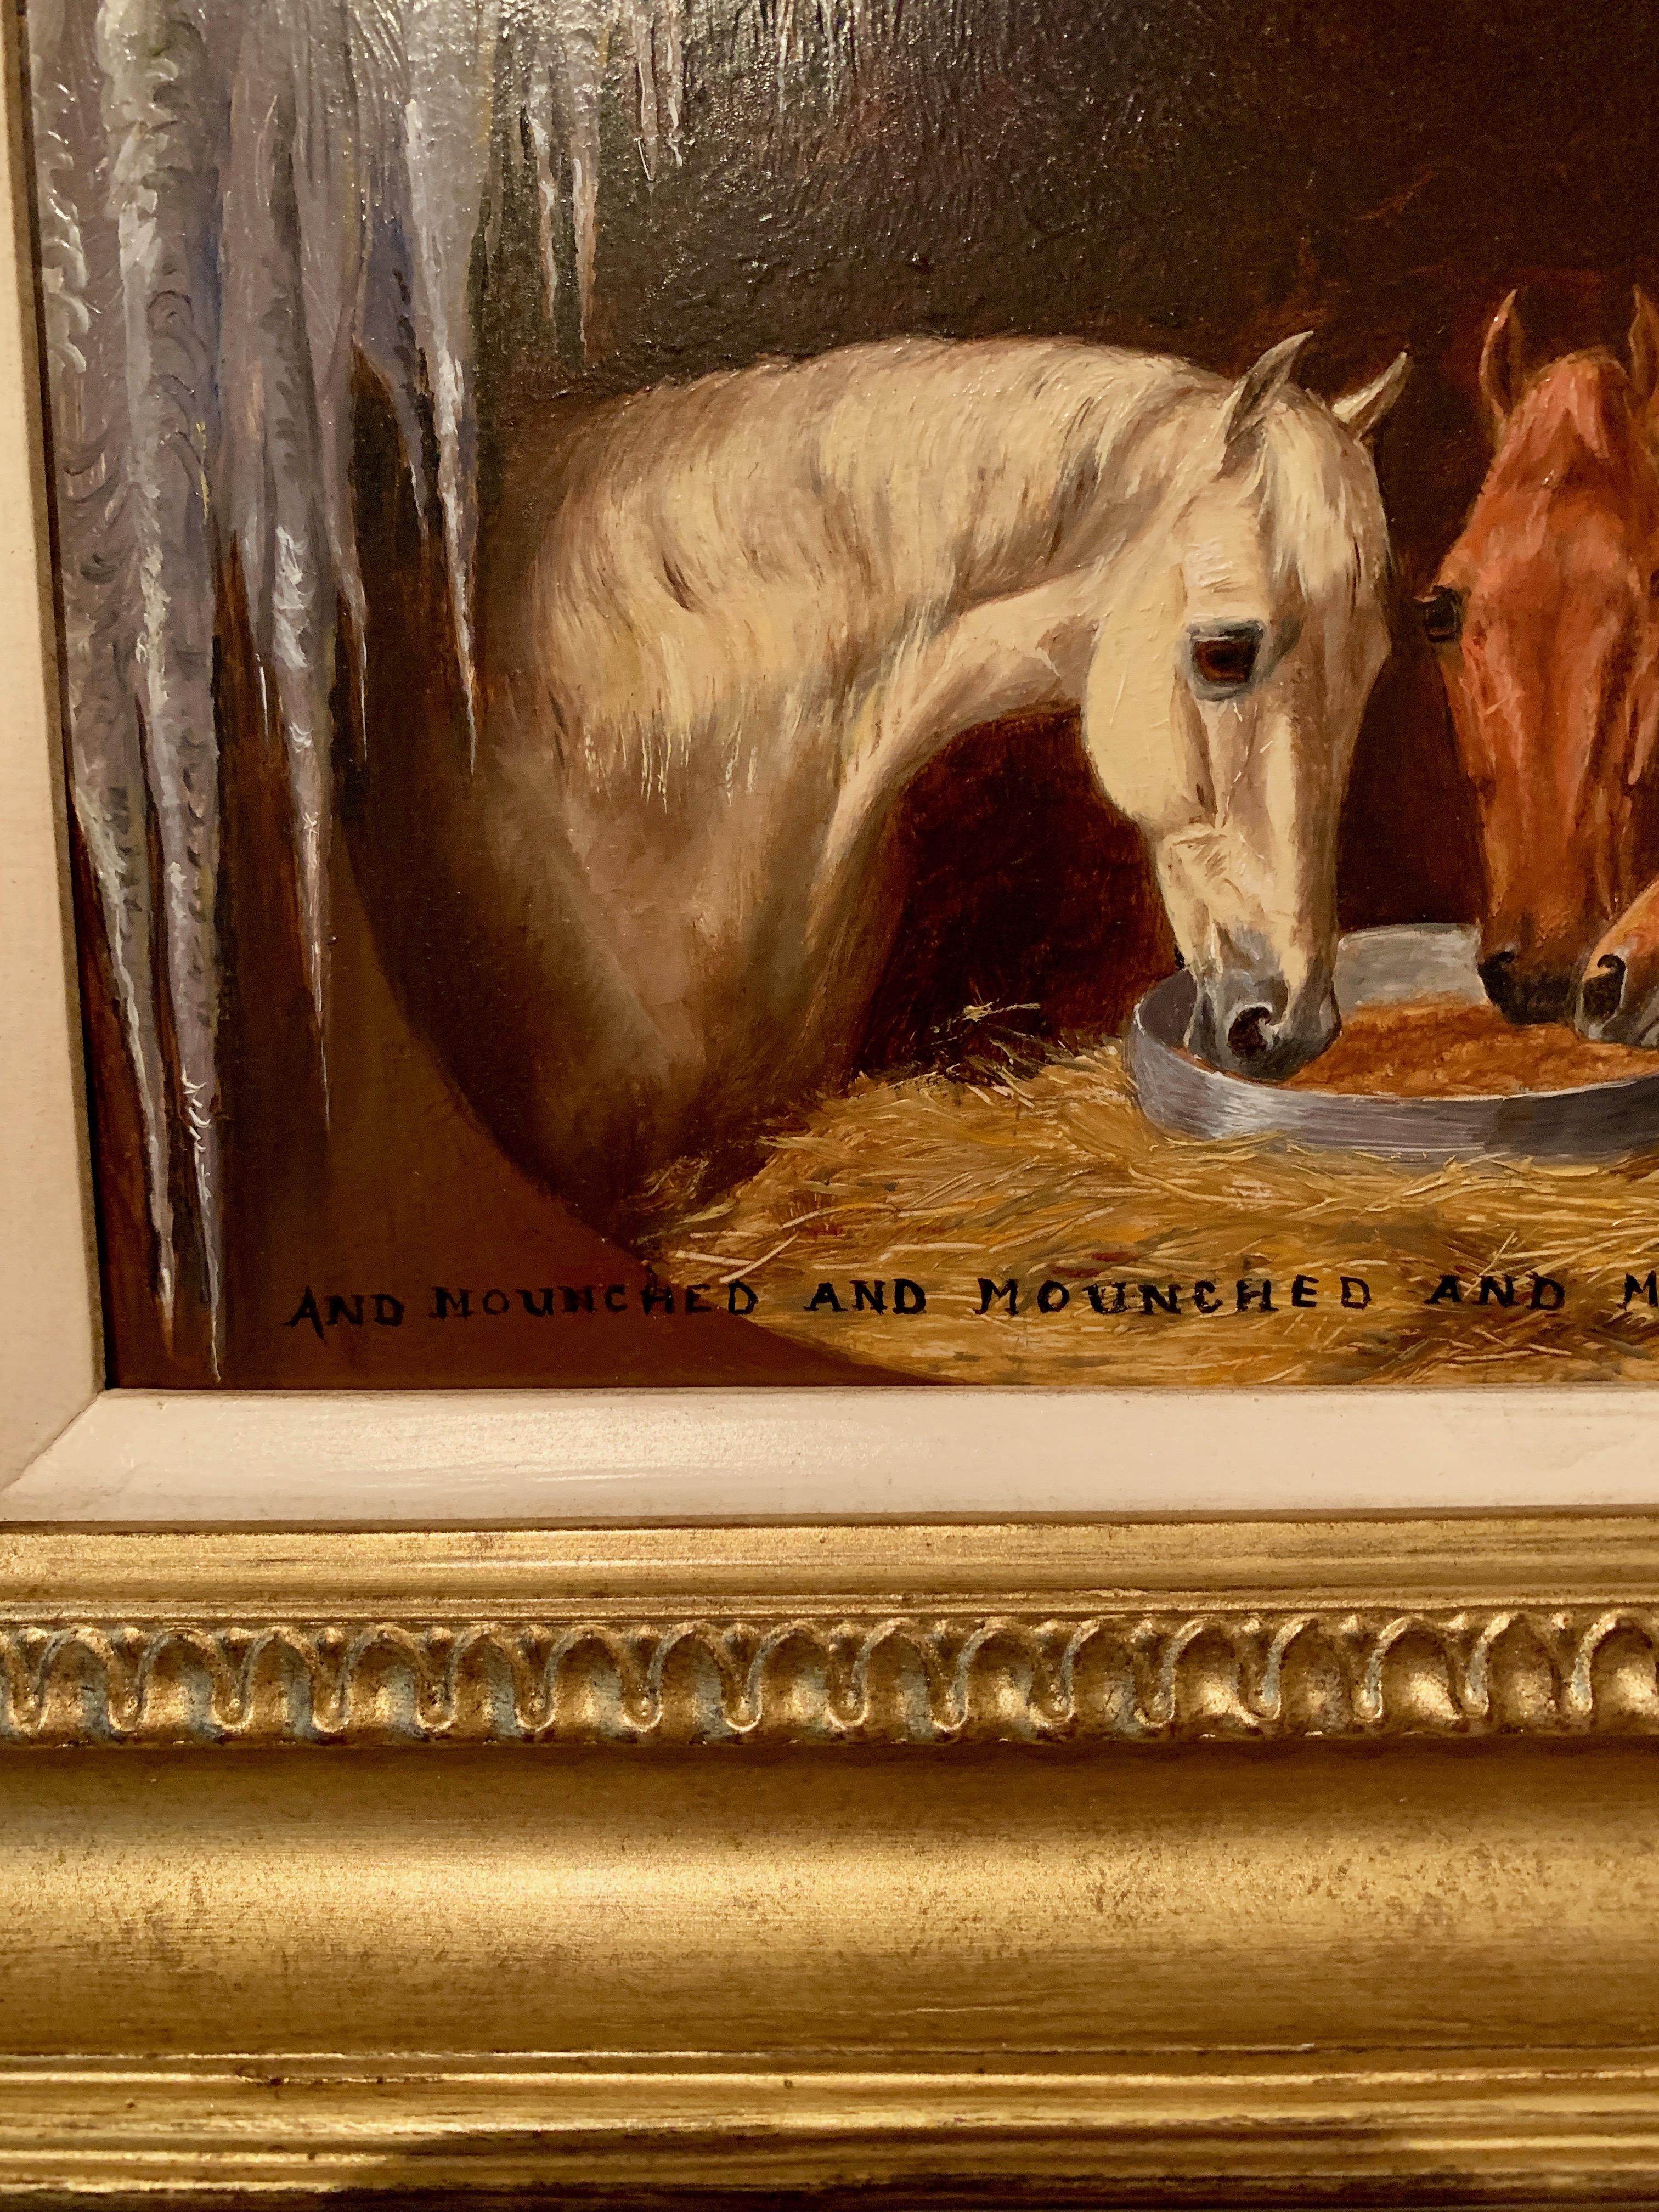 Antique English Horses portrait with holly, Shakespeare quote, in an Ice Cave. - Painting by Edward Algernon Stewart Douglas